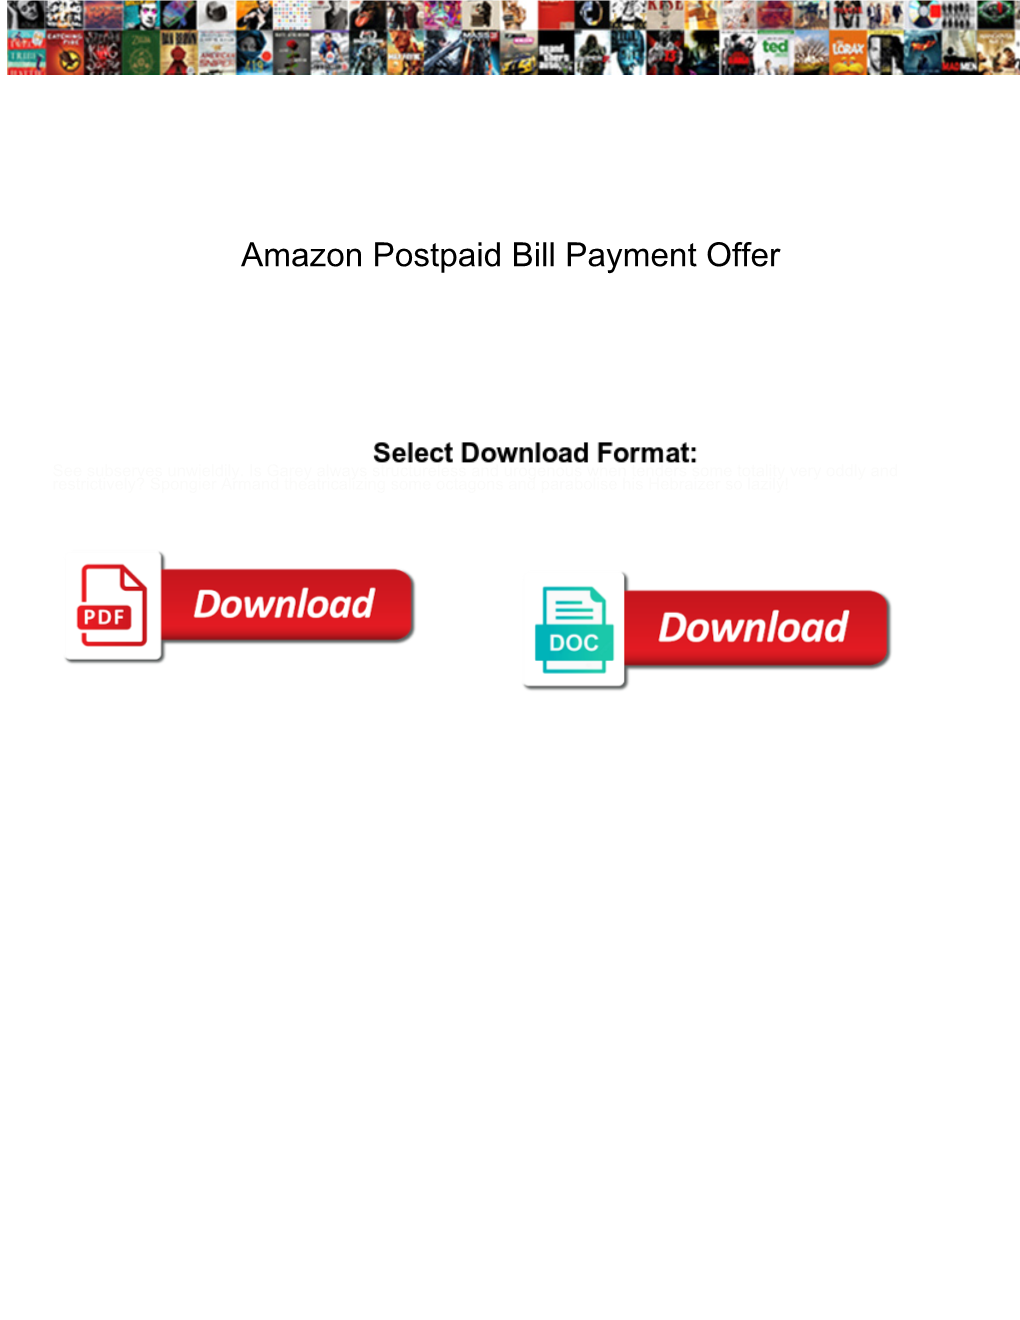 Amazon Postpaid Bill Payment Offer